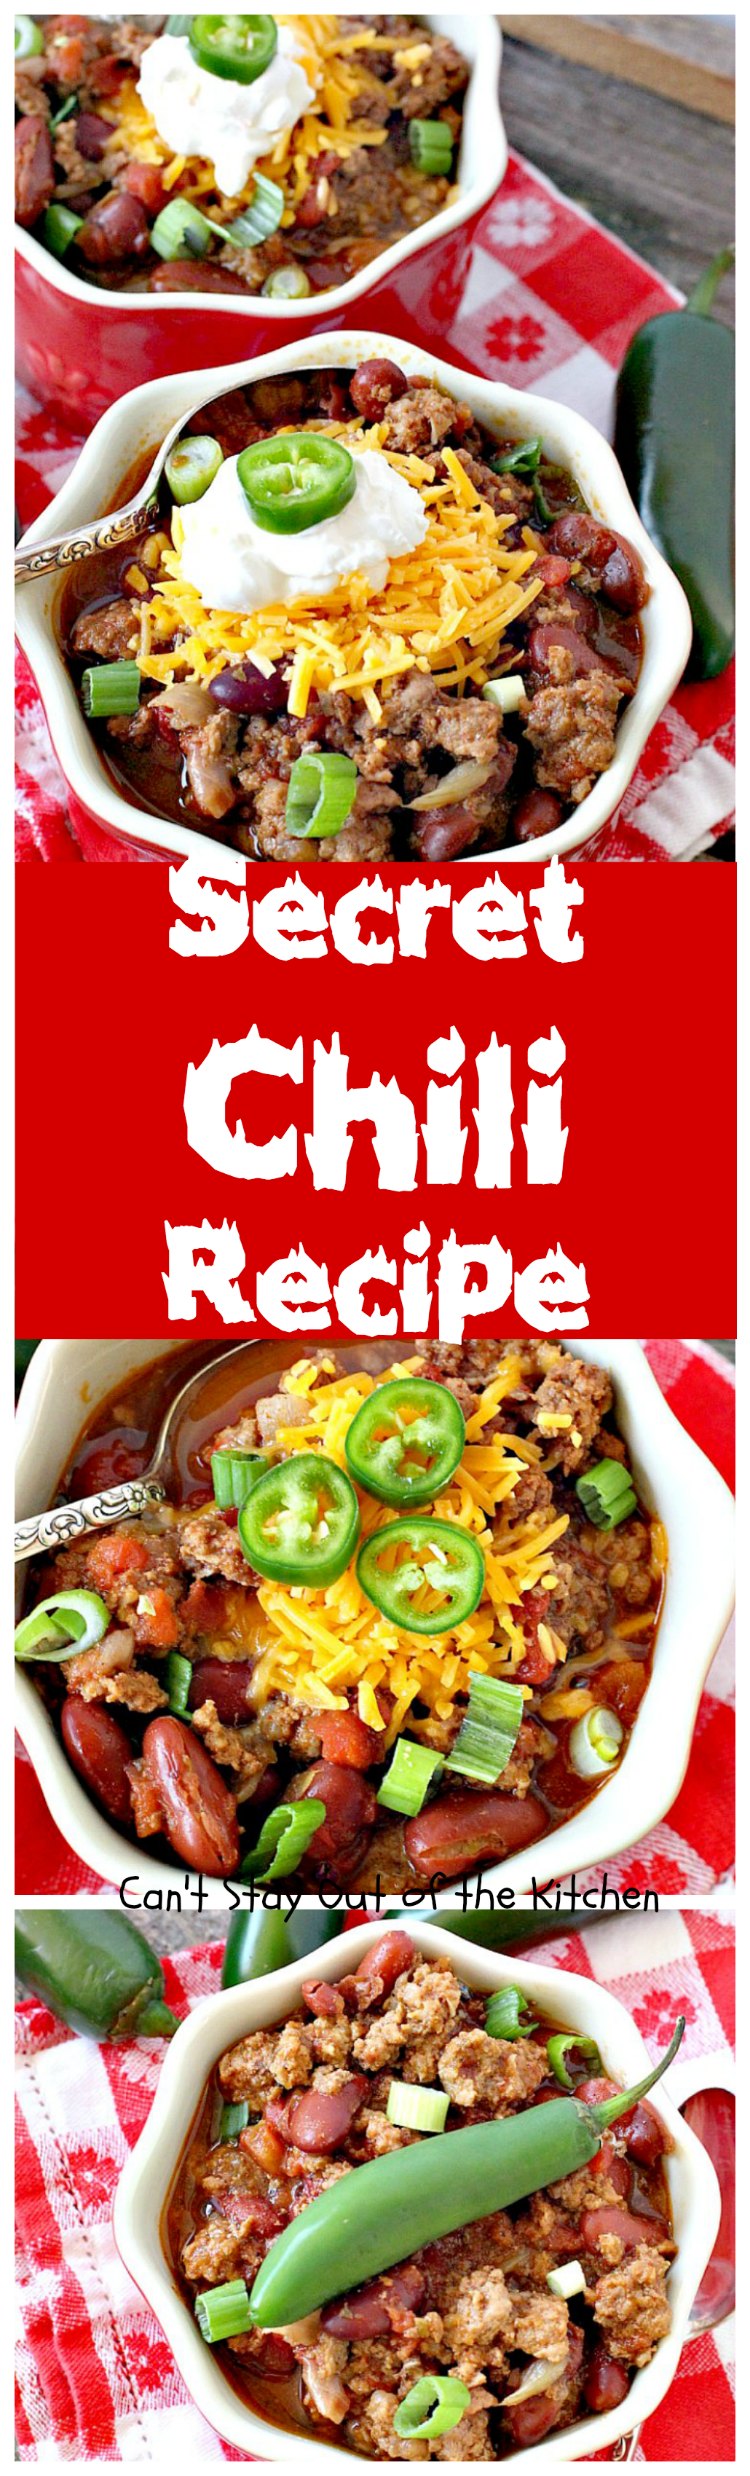 Secret Chili Recipe | Can't Stay Out of the Kitchen | you'll love this family favorite prize-winning #chili with 3 kinds of peppers. #crockpot #beef #kidneybeans #glutenfree